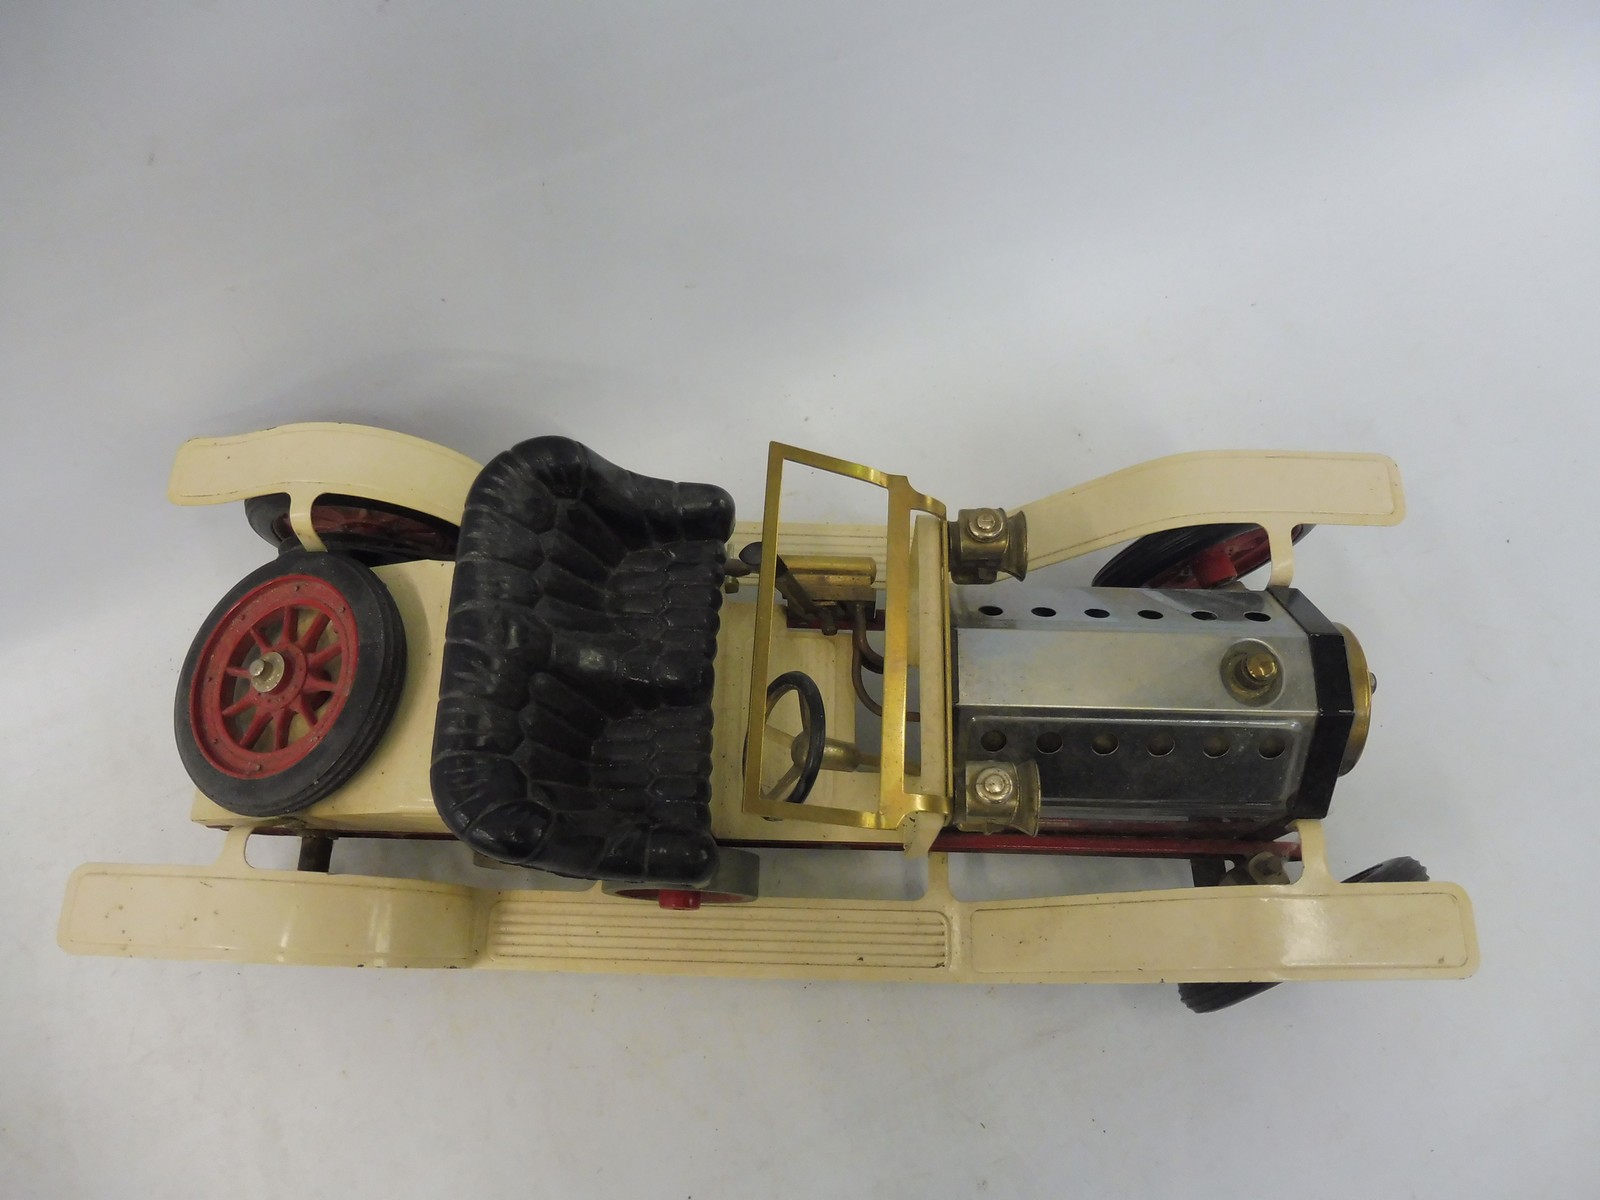 A Mamod 'Steam Roadster' live steam model of an Edwardian motor car. - Image 4 of 5